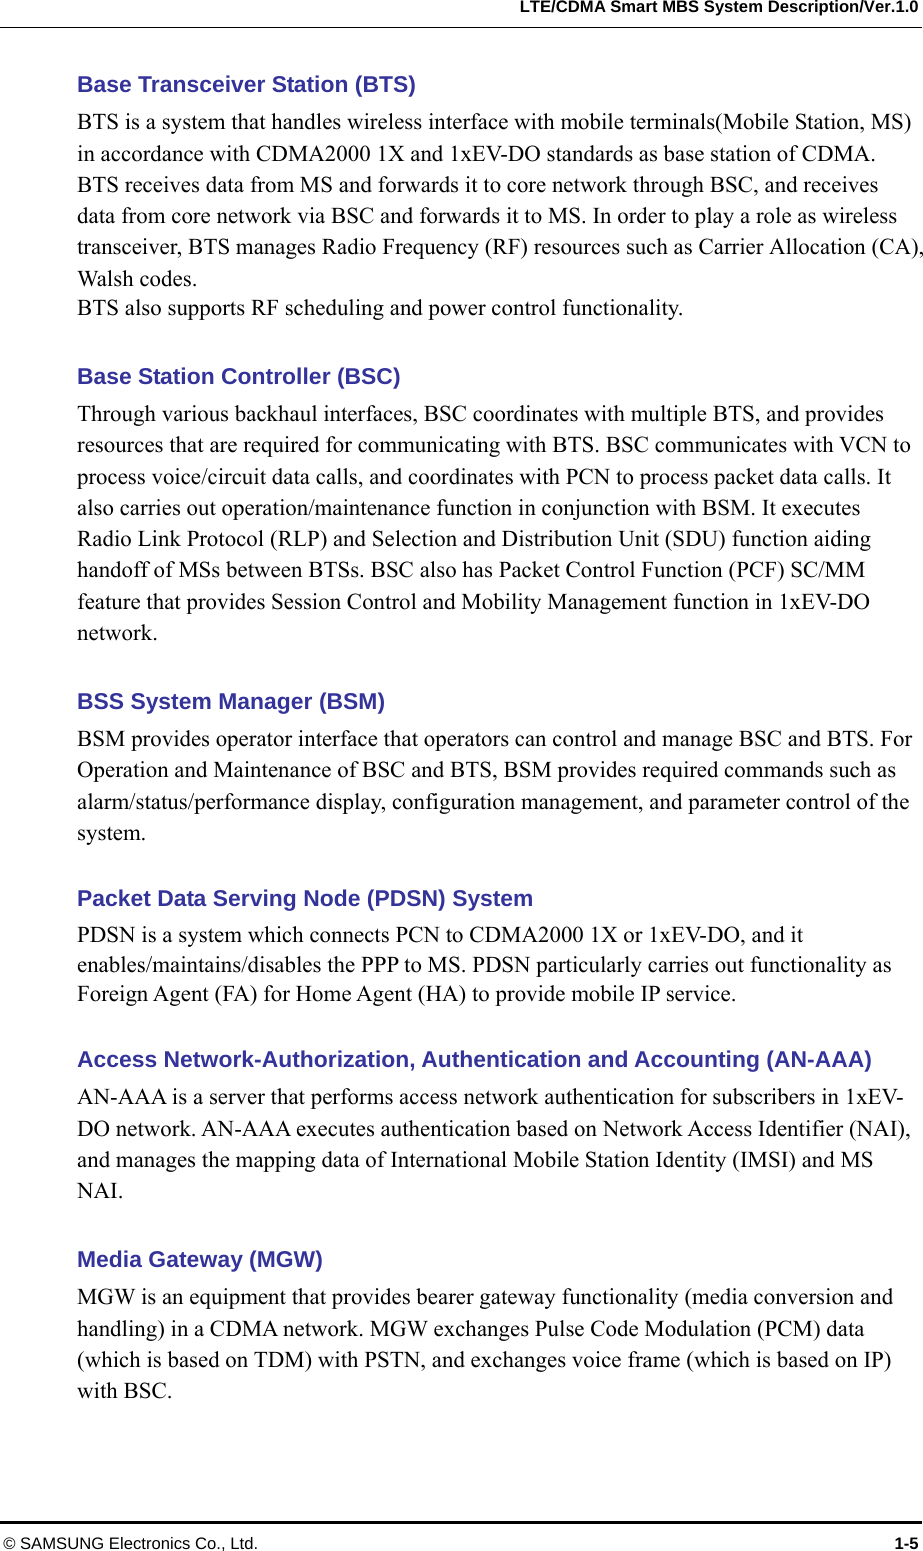   LTE/CDMA Smart MBS System Description/Ver.1.0 © SAMSUNG Electronics Co., Ltd.  1-5 Base Transceiver Station (BTS) BTS is a system that handles wireless interface with mobile terminals(Mobile Station, MS) in accordance with CDMA2000 1X and 1xEV-DO standards as base station of CDMA. BTS receives data from MS and forwards it to core network through BSC, and receives data from core network via BSC and forwards it to MS. In order to play a role as wireless transceiver, BTS manages Radio Frequency (RF) resources such as Carrier Allocation (CA), Walsh codes.   BTS also supports RF scheduling and power control functionality.  Base Station Controller (BSC) Through various backhaul interfaces, BSC coordinates with multiple BTS, and provides resources that are required for communicating with BTS. BSC communicates with VCN to process voice/circuit data calls, and coordinates with PCN to process packet data calls. It also carries out operation/maintenance function in conjunction with BSM. It executes Radio Link Protocol (RLP) and Selection and Distribution Unit (SDU) function aiding handoff of MSs between BTSs. BSC also has Packet Control Function (PCF) SC/MM feature that provides Session Control and Mobility Management function in 1xEV-DO network.  BSS System Manager (BSM) BSM provides operator interface that operators can control and manage BSC and BTS. For Operation and Maintenance of BSC and BTS, BSM provides required commands such as alarm/status/performance display, configuration management, and parameter control of the system.  Packet Data Serving Node (PDSN) System PDSN is a system which connects PCN to CDMA2000 1X or 1xEV-DO, and it enables/maintains/disables the PPP to MS. PDSN particularly carries out functionality as Foreign Agent (FA) for Home Agent (HA) to provide mobile IP service.  Access Network-Authorization, Authentication and Accounting (AN-AAA) AN-AAA is a server that performs access network authentication for subscribers in 1xEV-DO network. AN-AAA executes authentication based on Network Access Identifier (NAI), and manages the mapping data of International Mobile Station Identity (IMSI) and MS NAI.  Media Gateway (MGW) MGW is an equipment that provides bearer gateway functionality (media conversion and handling) in a CDMA network. MGW exchanges Pulse Code Modulation (PCM) data (which is based on TDM) with PSTN, and exchanges voice frame (which is based on IP) with BSC.  